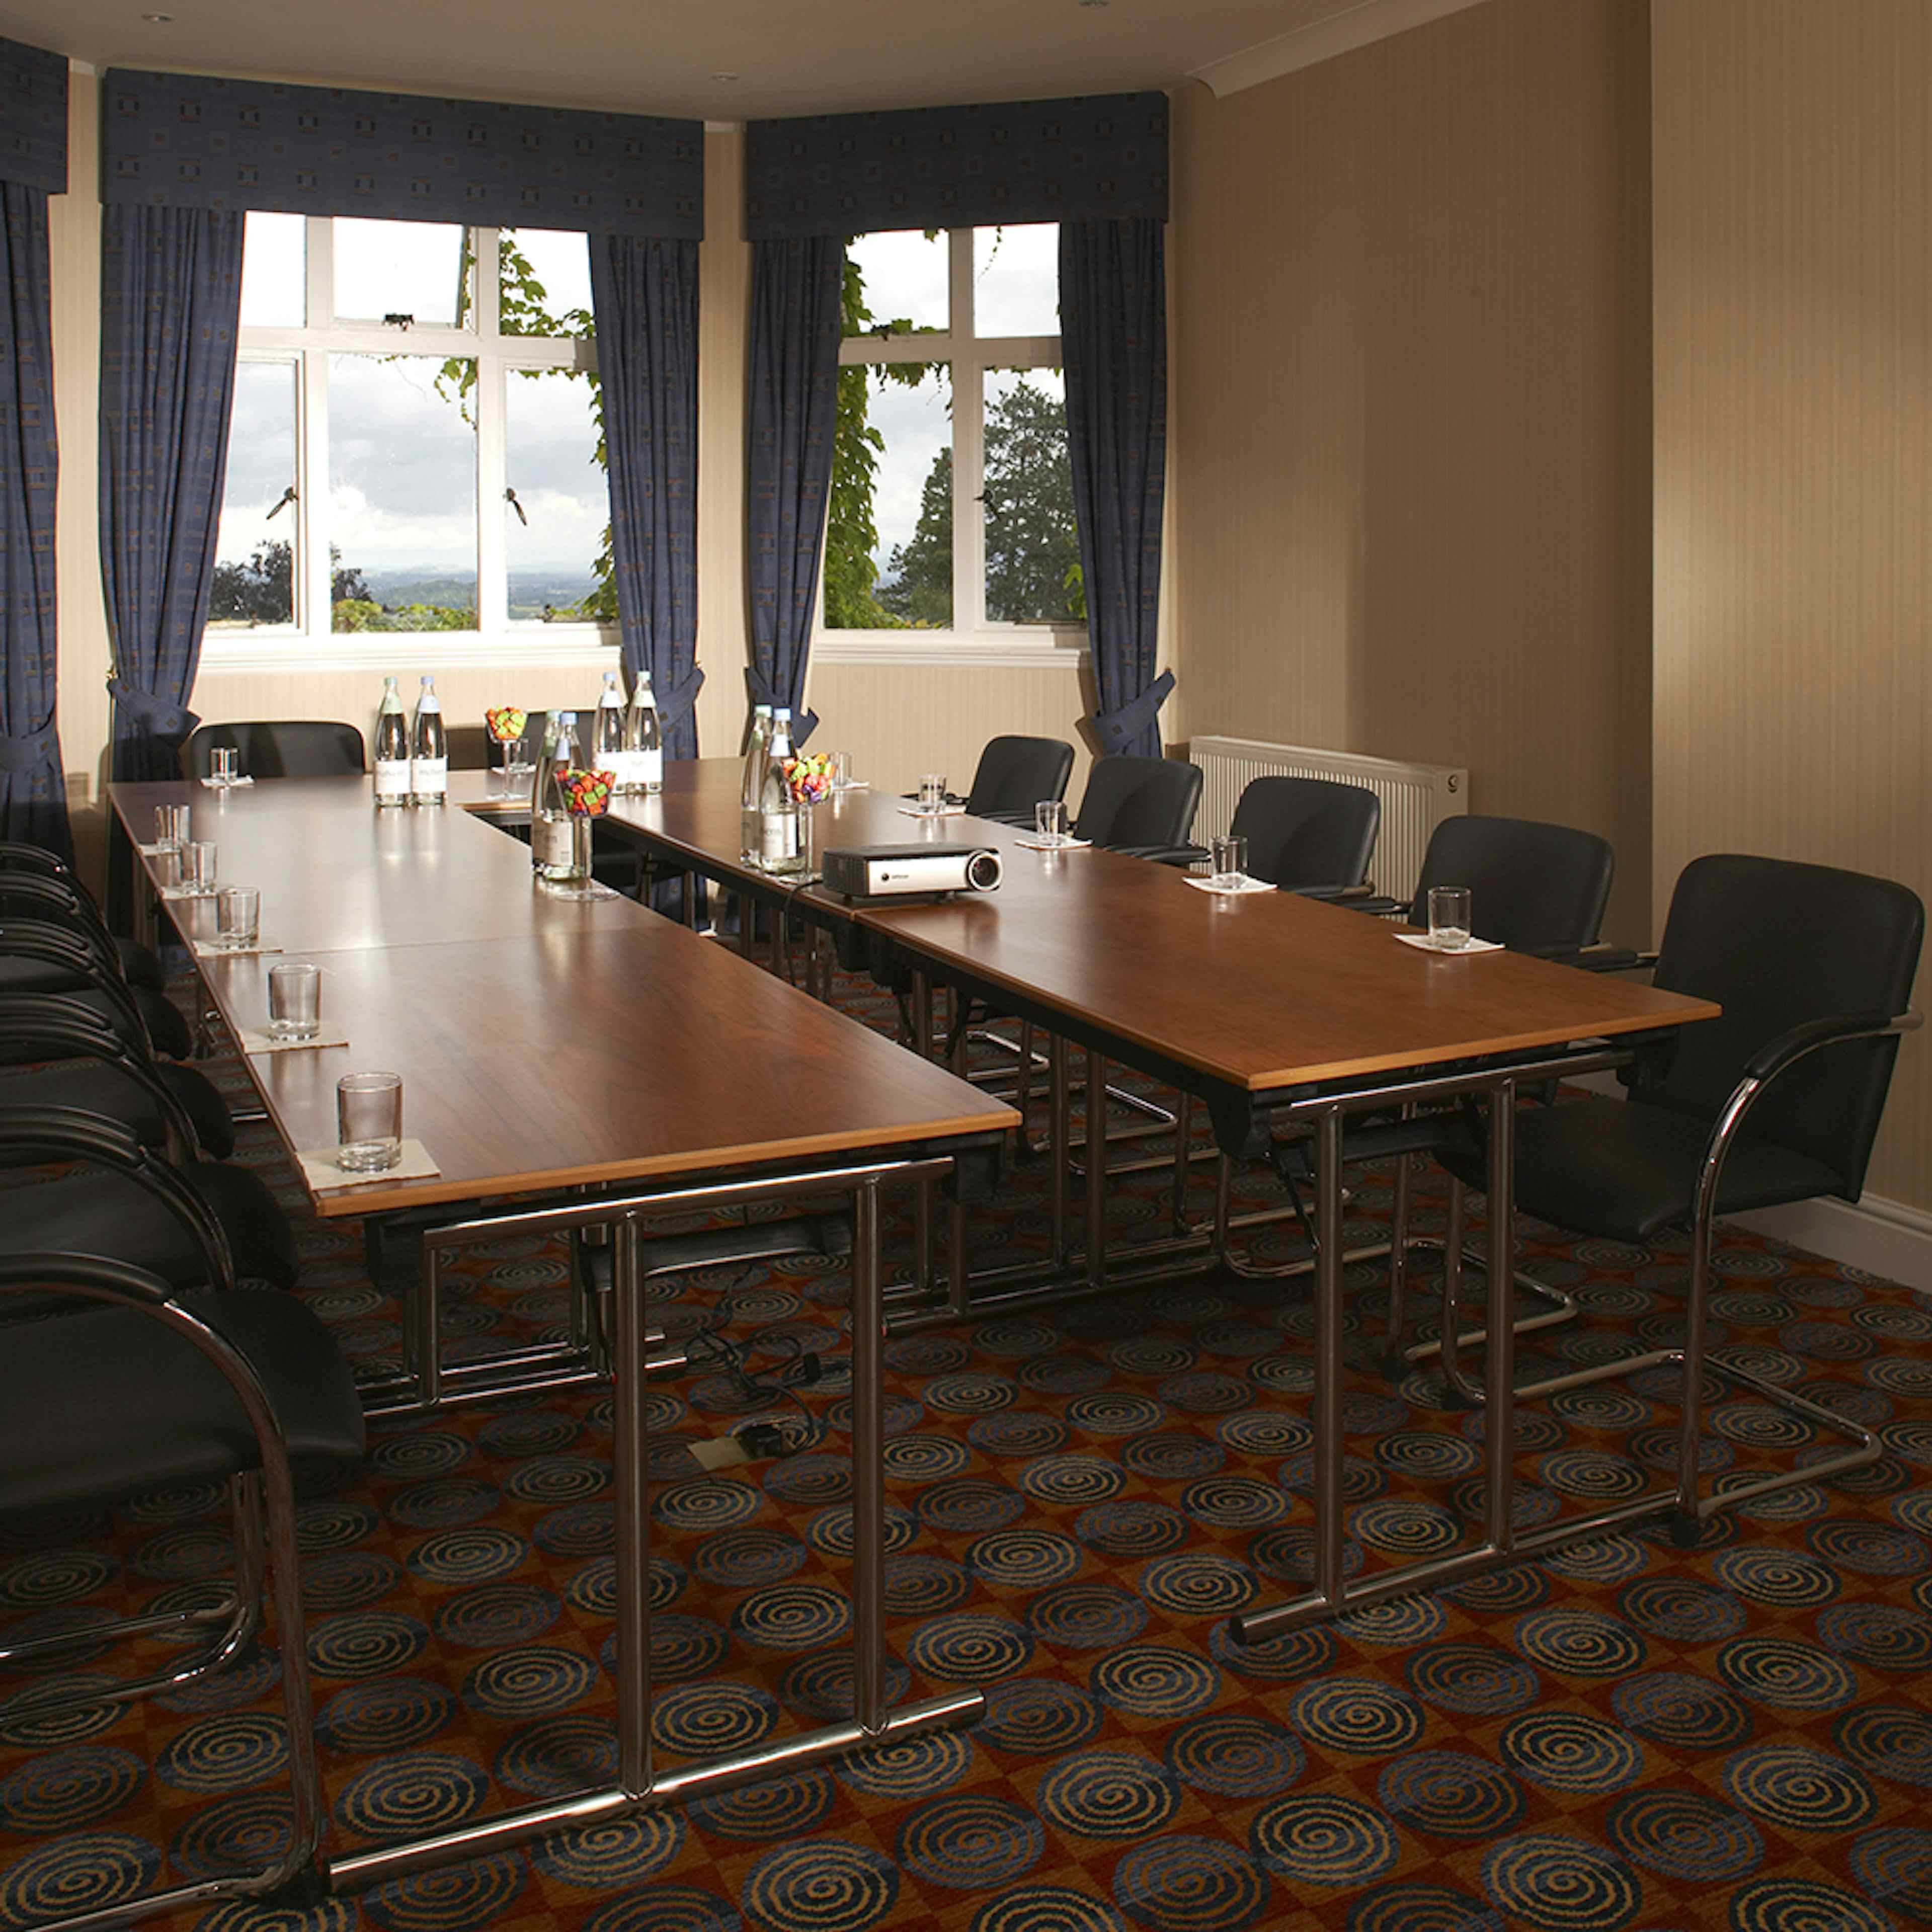 The Abbey Hotel - Montgomery Suite image 1